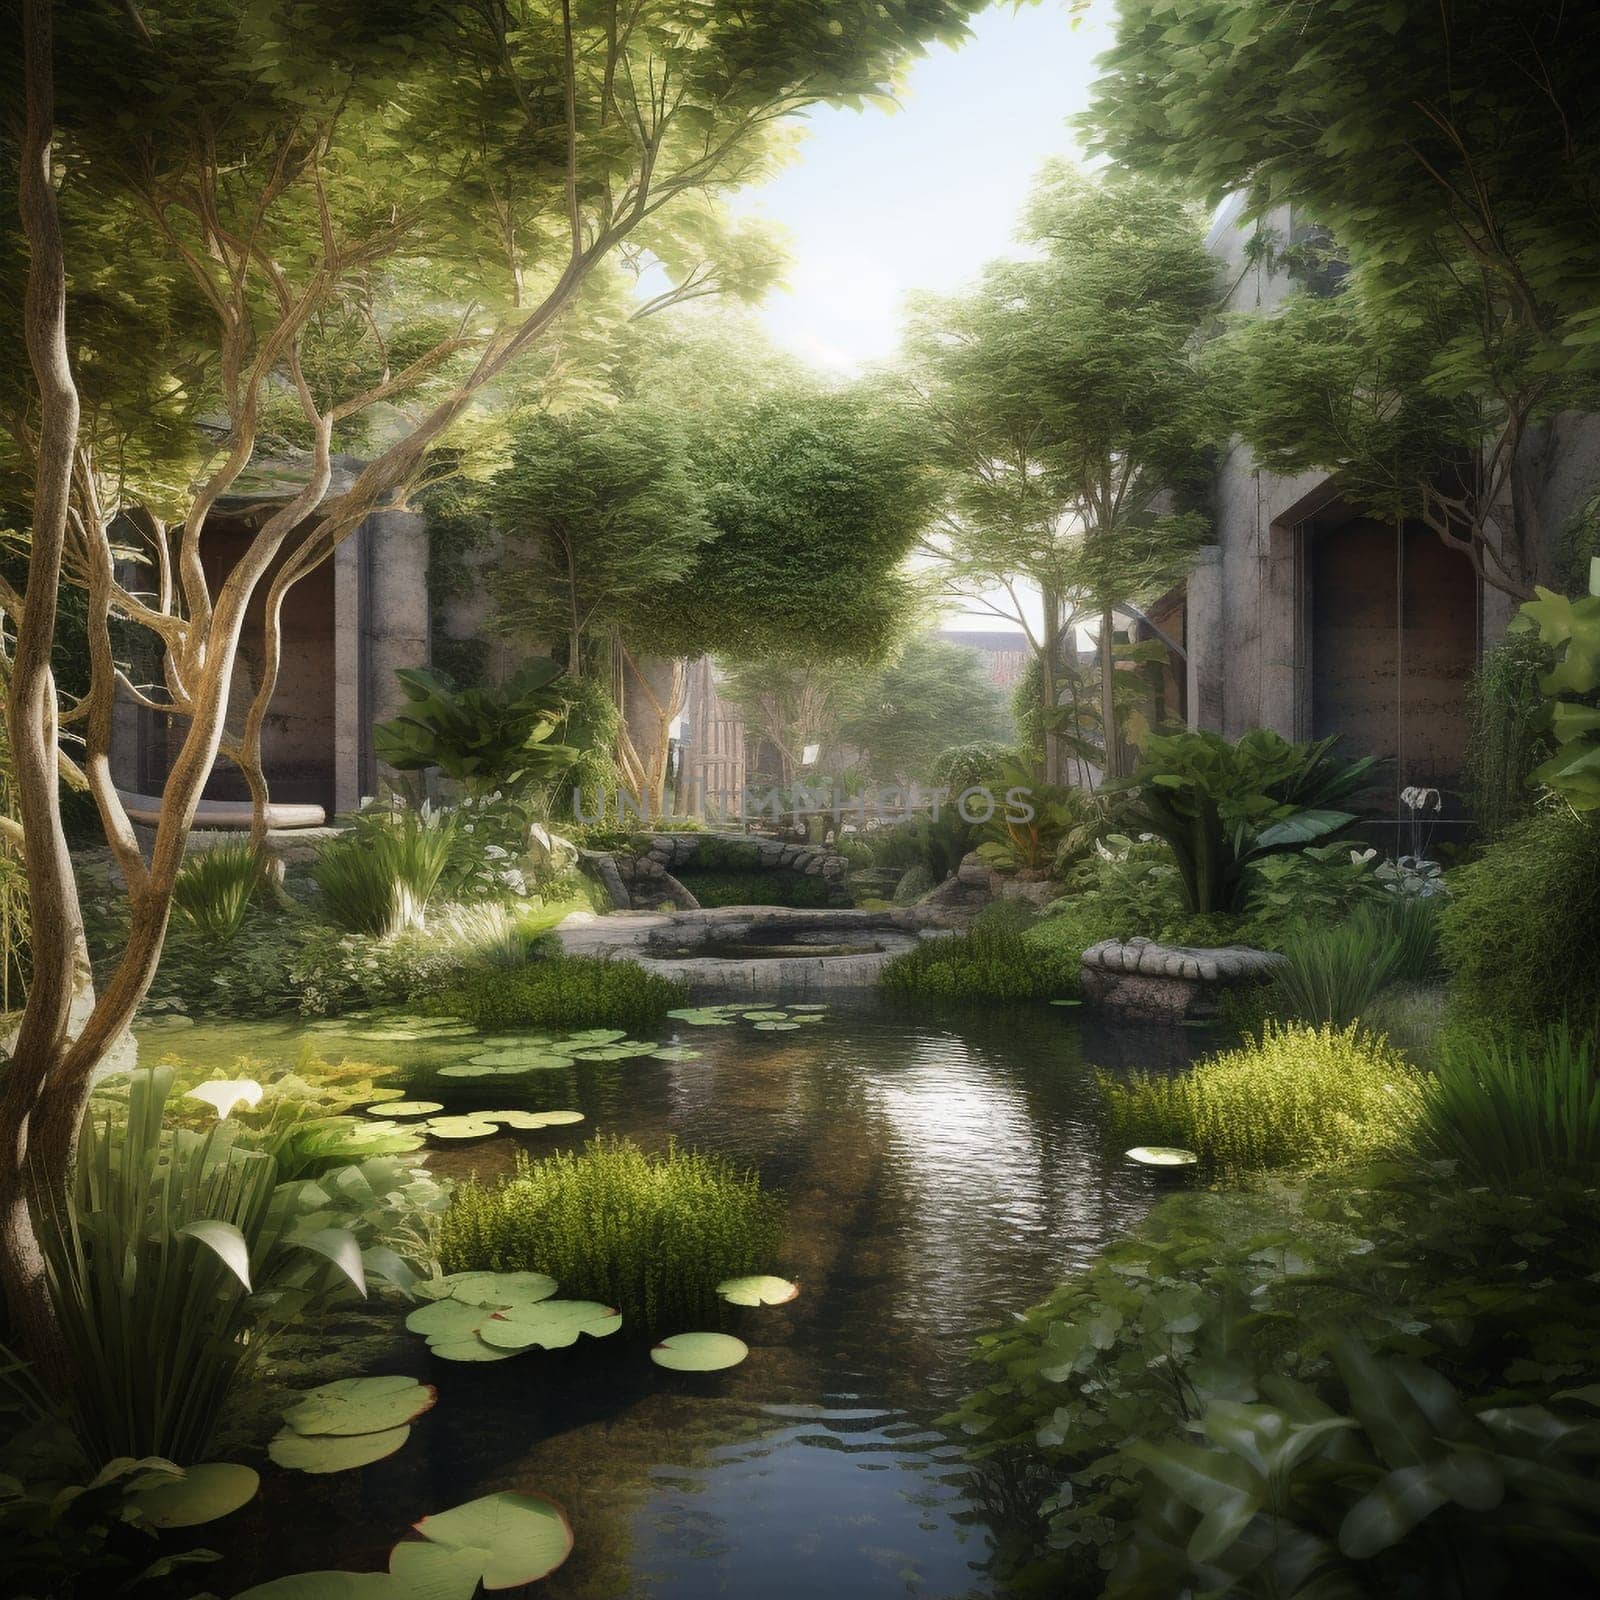 This image captures the importance of finding moments of peace and quiet in urban living, showing a tranquil garden oasis hidden away in the midst of a busy city. The garden is filled with lush plants and a calming water feature, providing a sense of serenity and calm in the midst of the hustle and bustle of the city. The image conveys the sense of renewal and refreshment that comes from connecting with nature, even in small and unexpected ways.